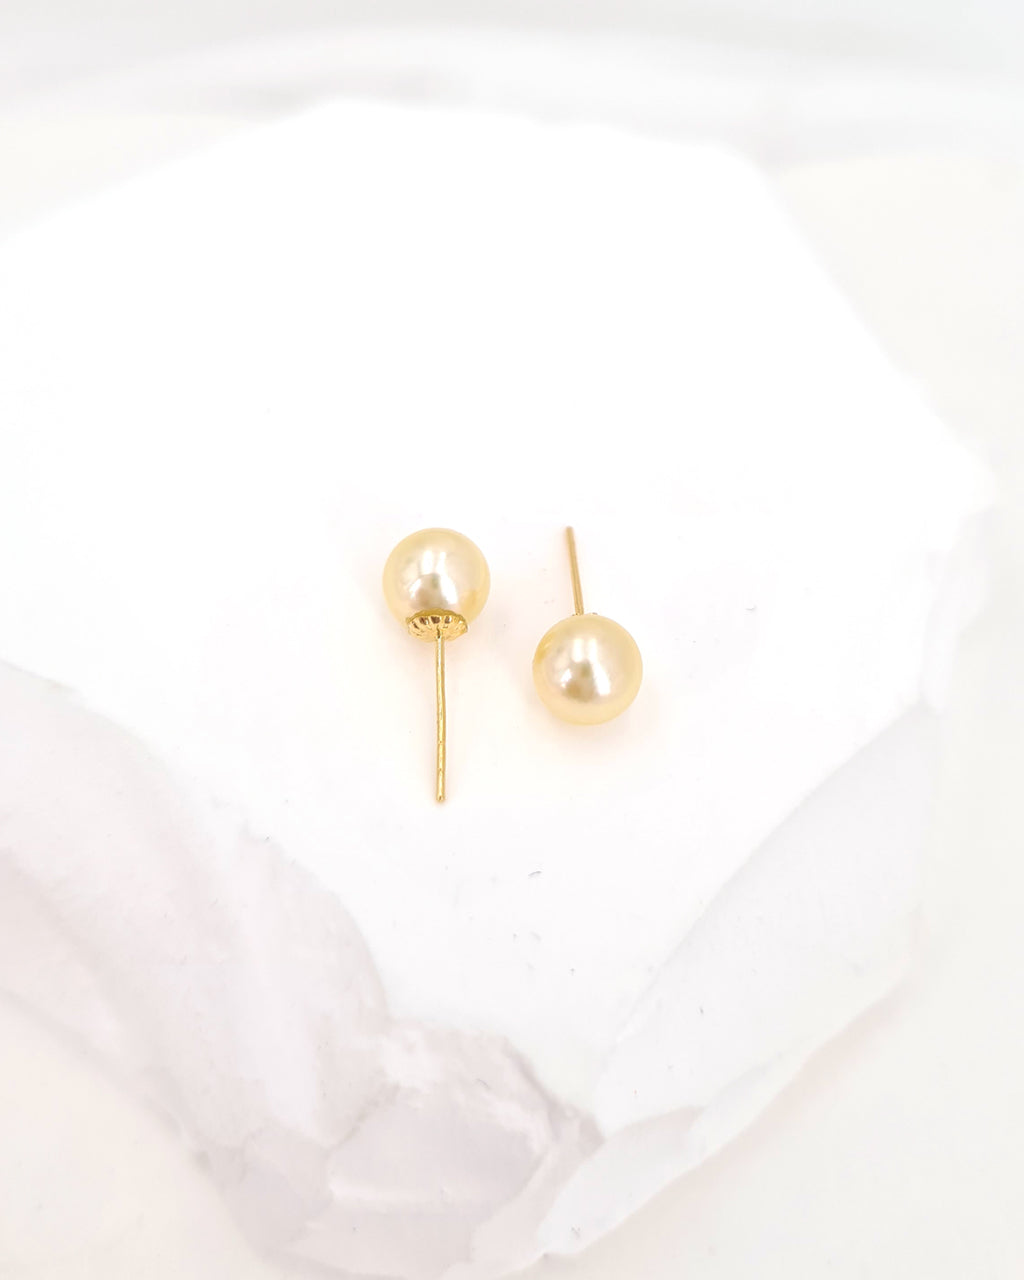 Queen Gold Akoya Sea Pearls 18K Gold Stud Earrings - 5mm to 5.5mm